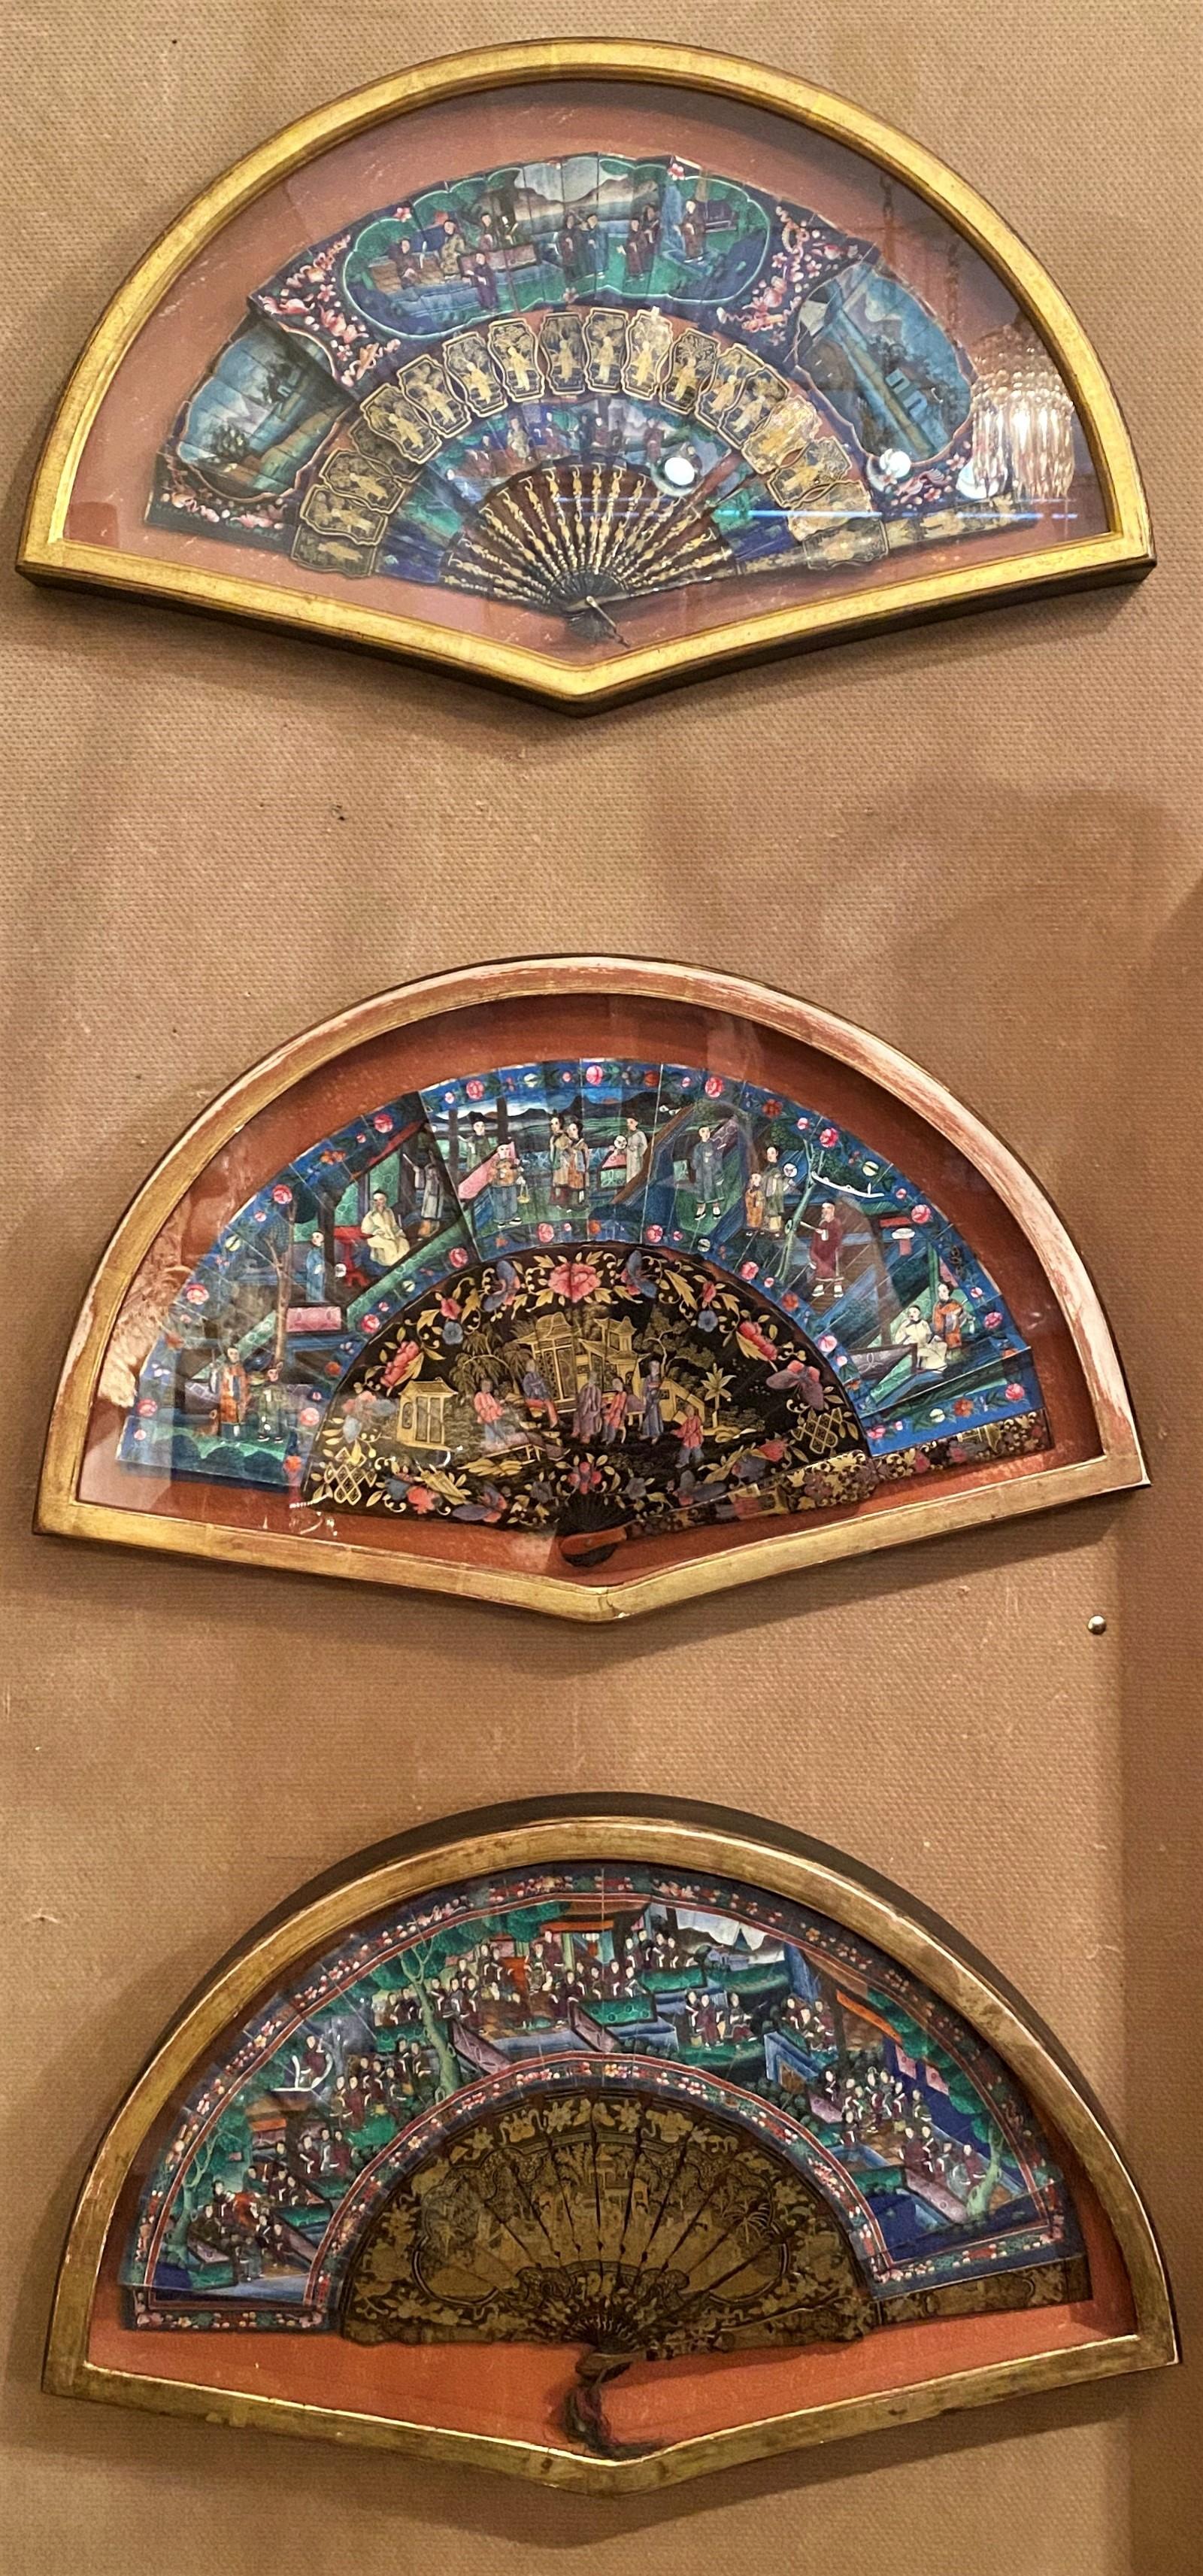 This is a beautiful collection of antique fans mounted in fan-shaped frames. Each fan is lovely in its own right. The colors and images on the fans are bright and clear.
 